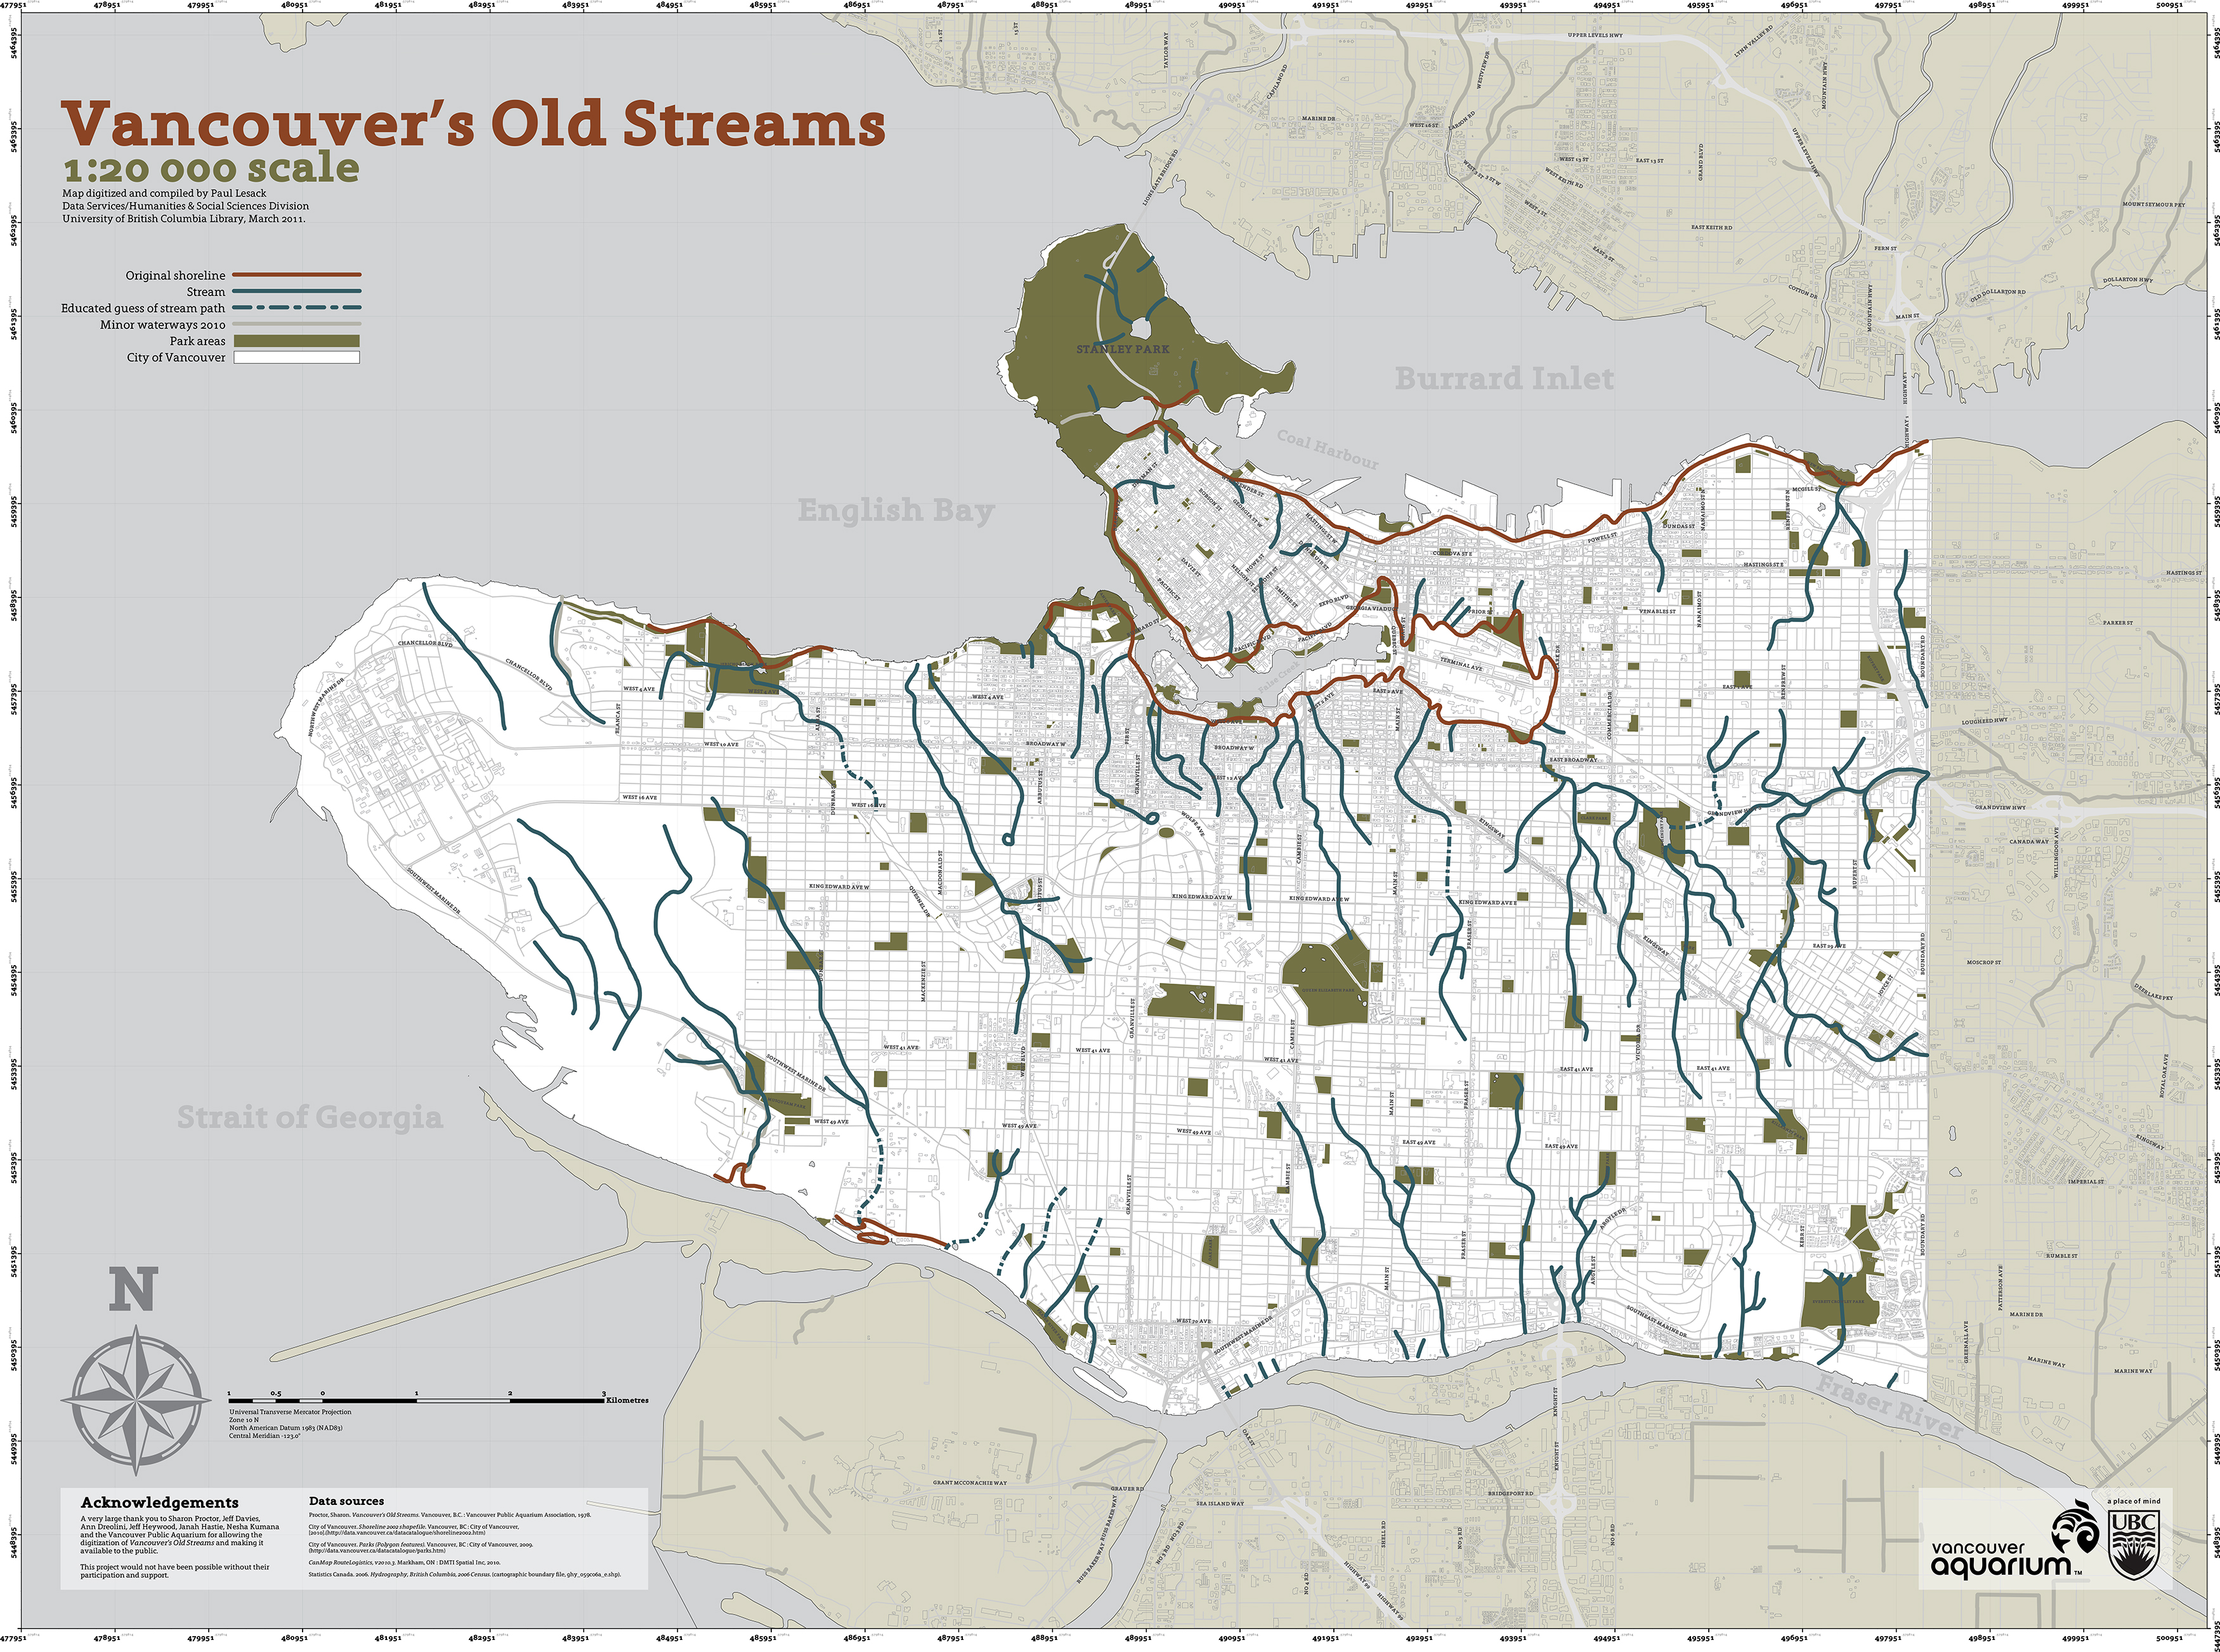 A map of Vancouver's old streams